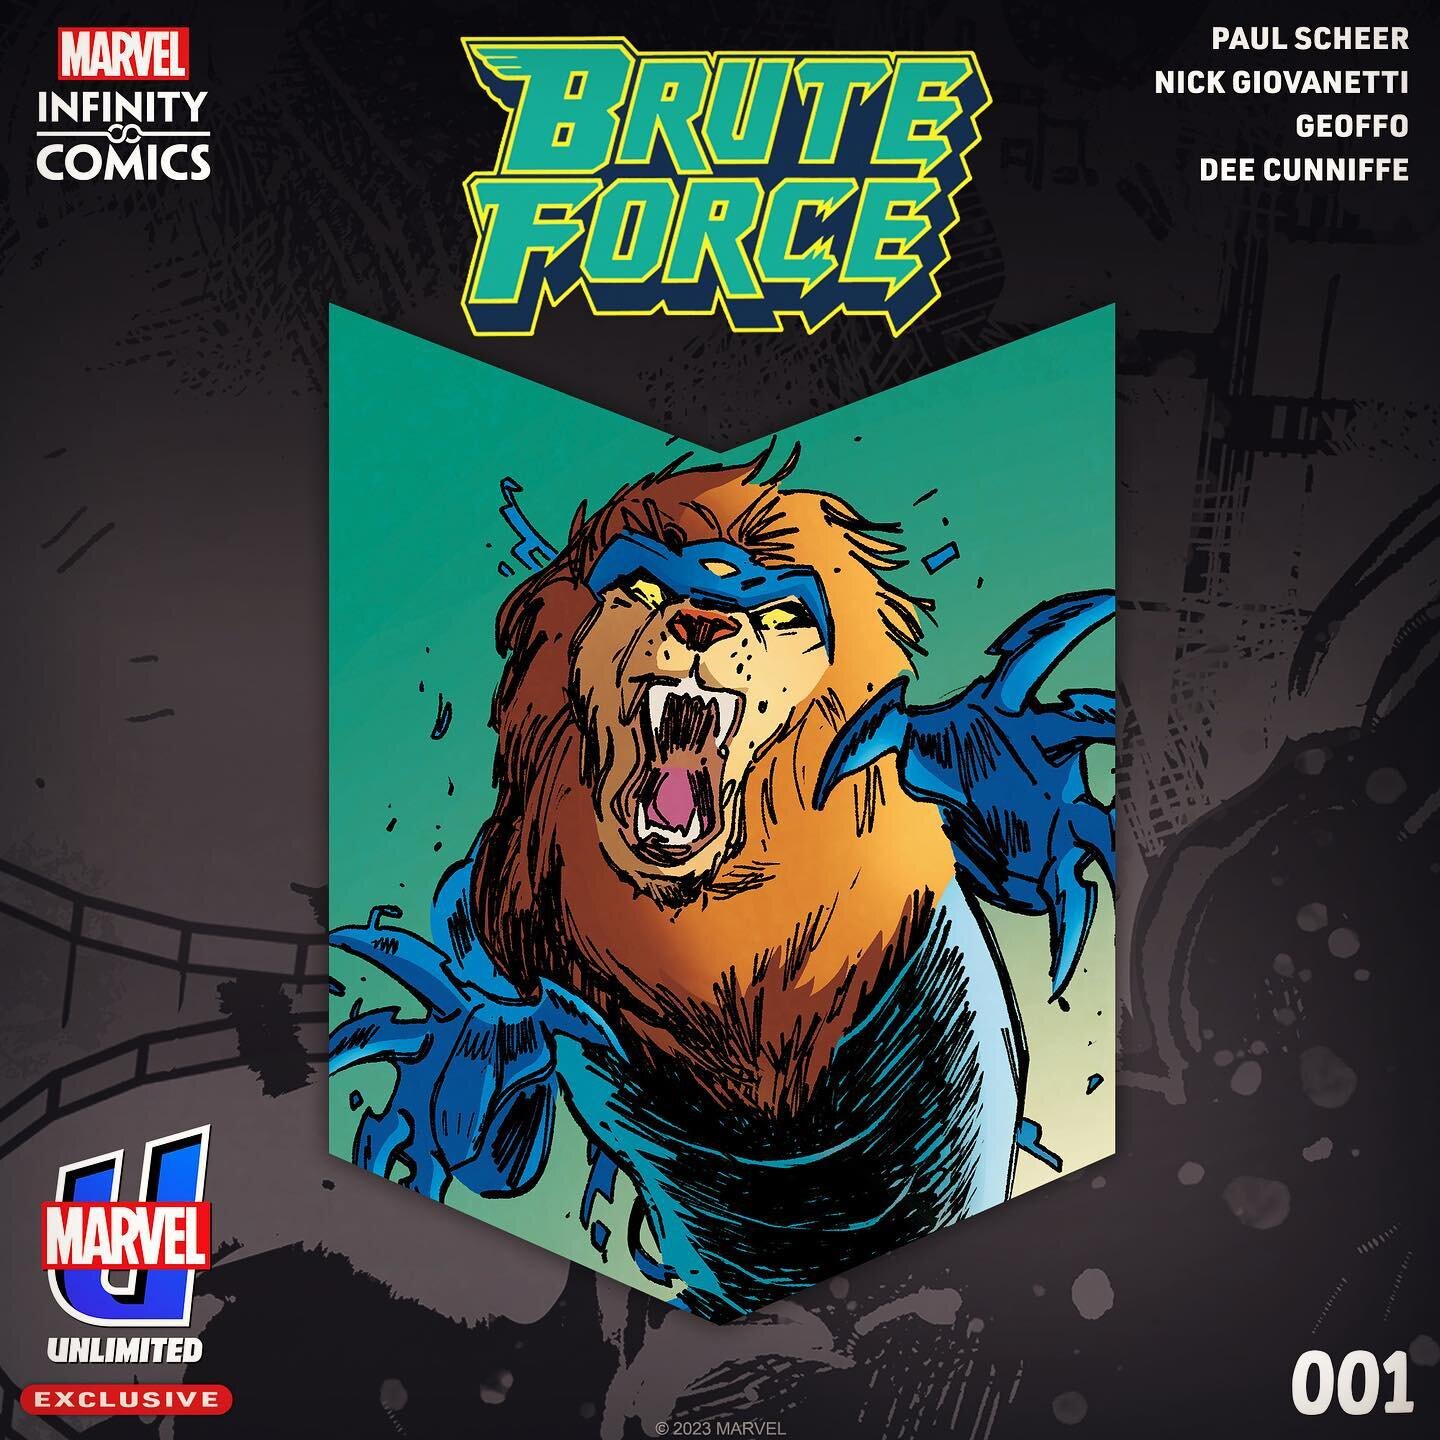 The lovely people at Marvel were gracious enough to let my buddy @paulscheer and I resurrect our favorite forgotten marvel team, BRUTE FORCE, in a new mini series. All 6 chapters are available NOW exclusively on the Marvel Unlimited app. Please check